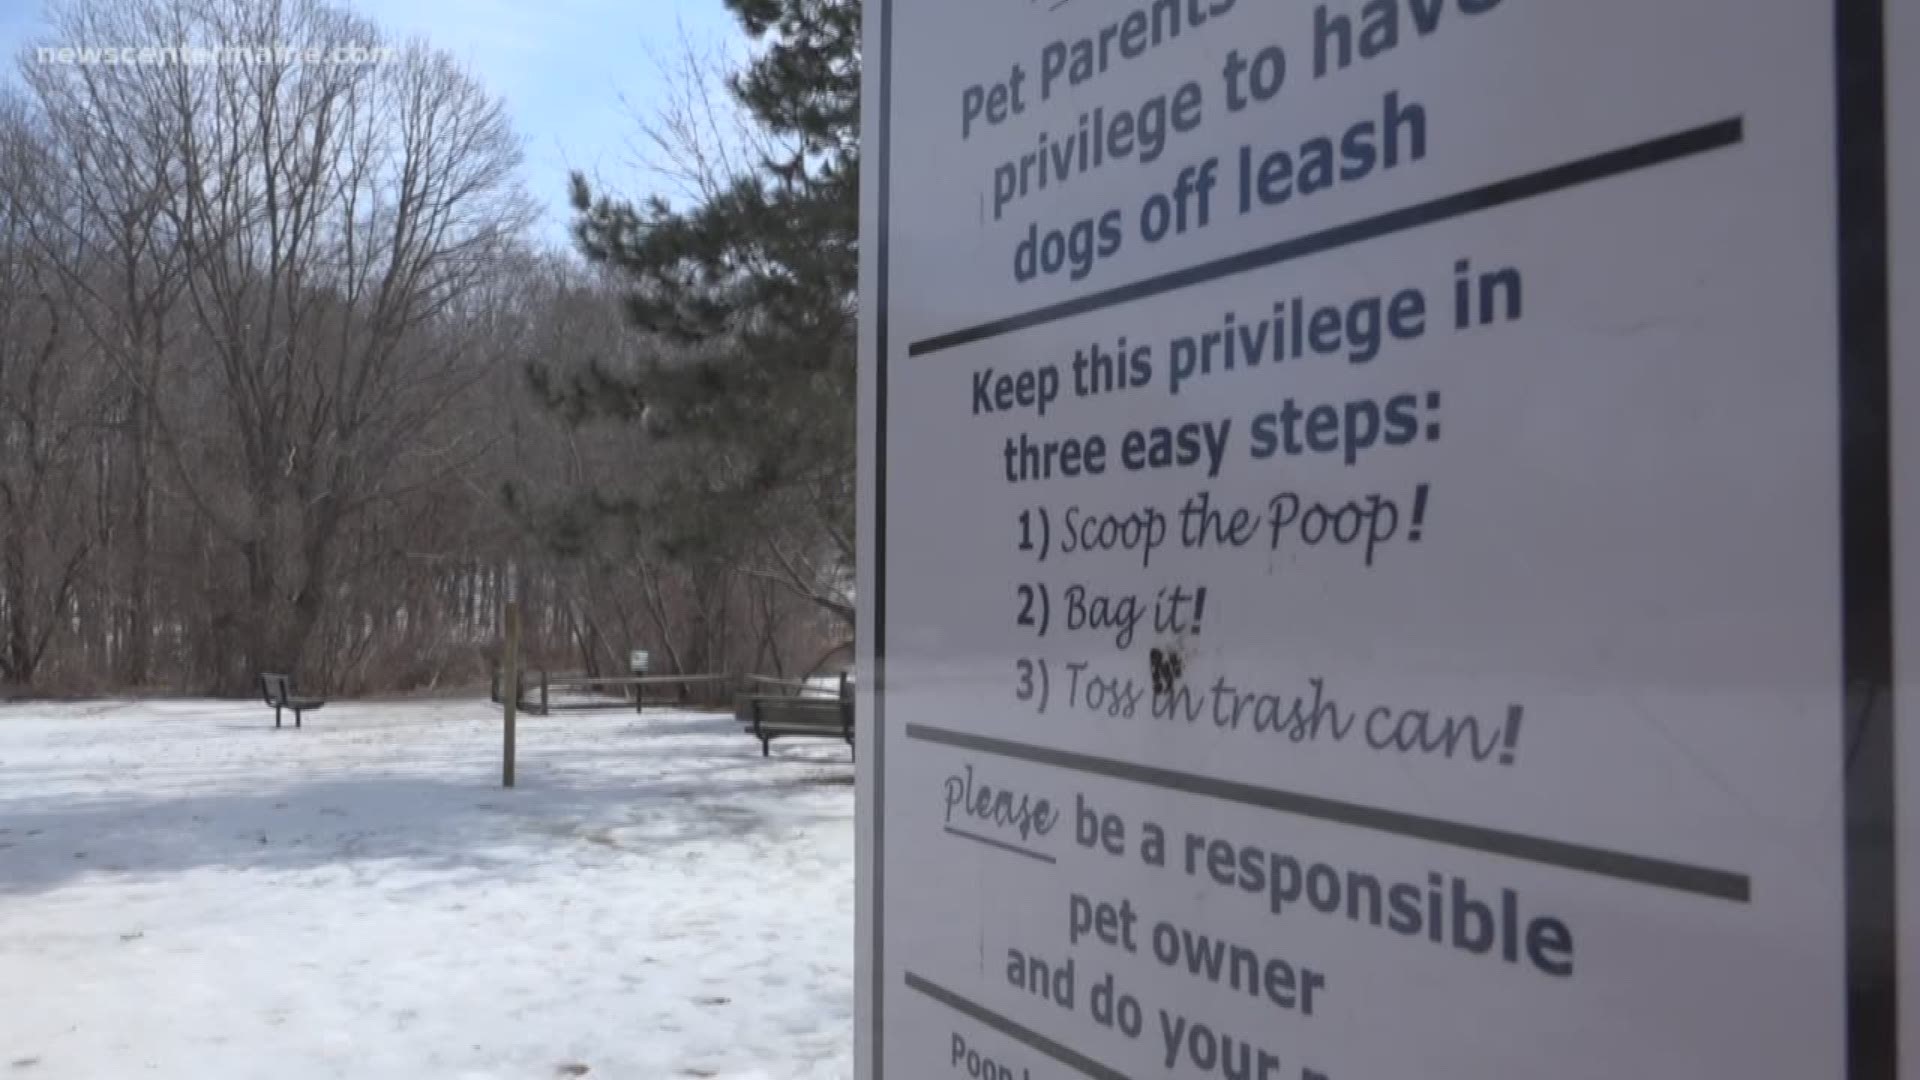 Workers at a South Portland dog park are sending a friendly reminder to owners to pick up their pet's waste.